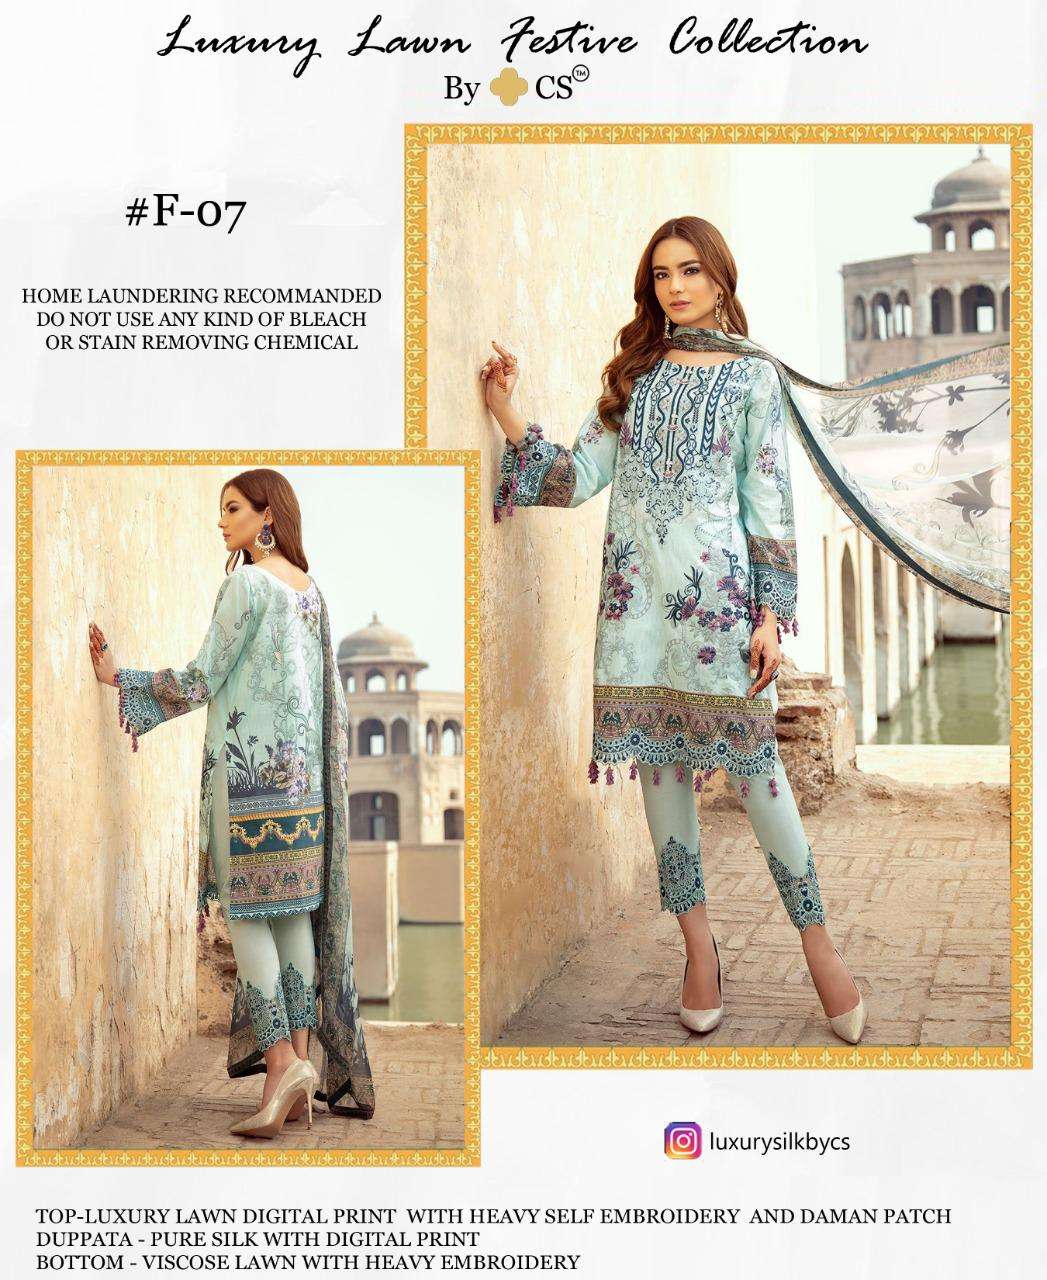 LUXURY LAWN FESTIVE COLLECTION BY CS F-05 TO F-09 SERIES BEAUTIFUL SUITS STYLISH FANCY COLORFUL PARTY WEAR & OCCASIONAL WEAR LUXURY LAWN DIGITAL PRINT AT WHOLESALE PRICE